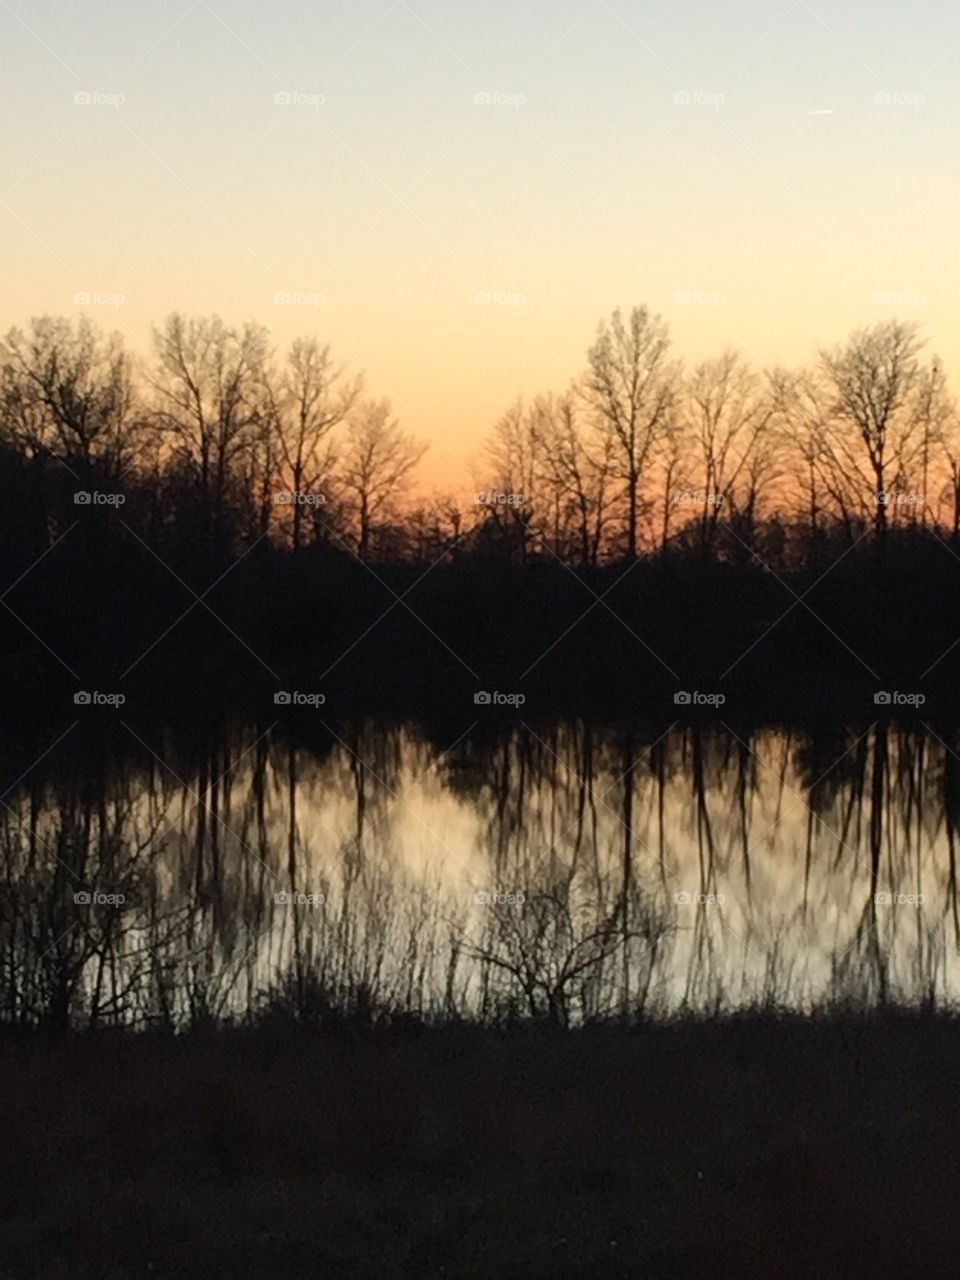 Sunset reflection on lake in the Midwest, Indiana winter